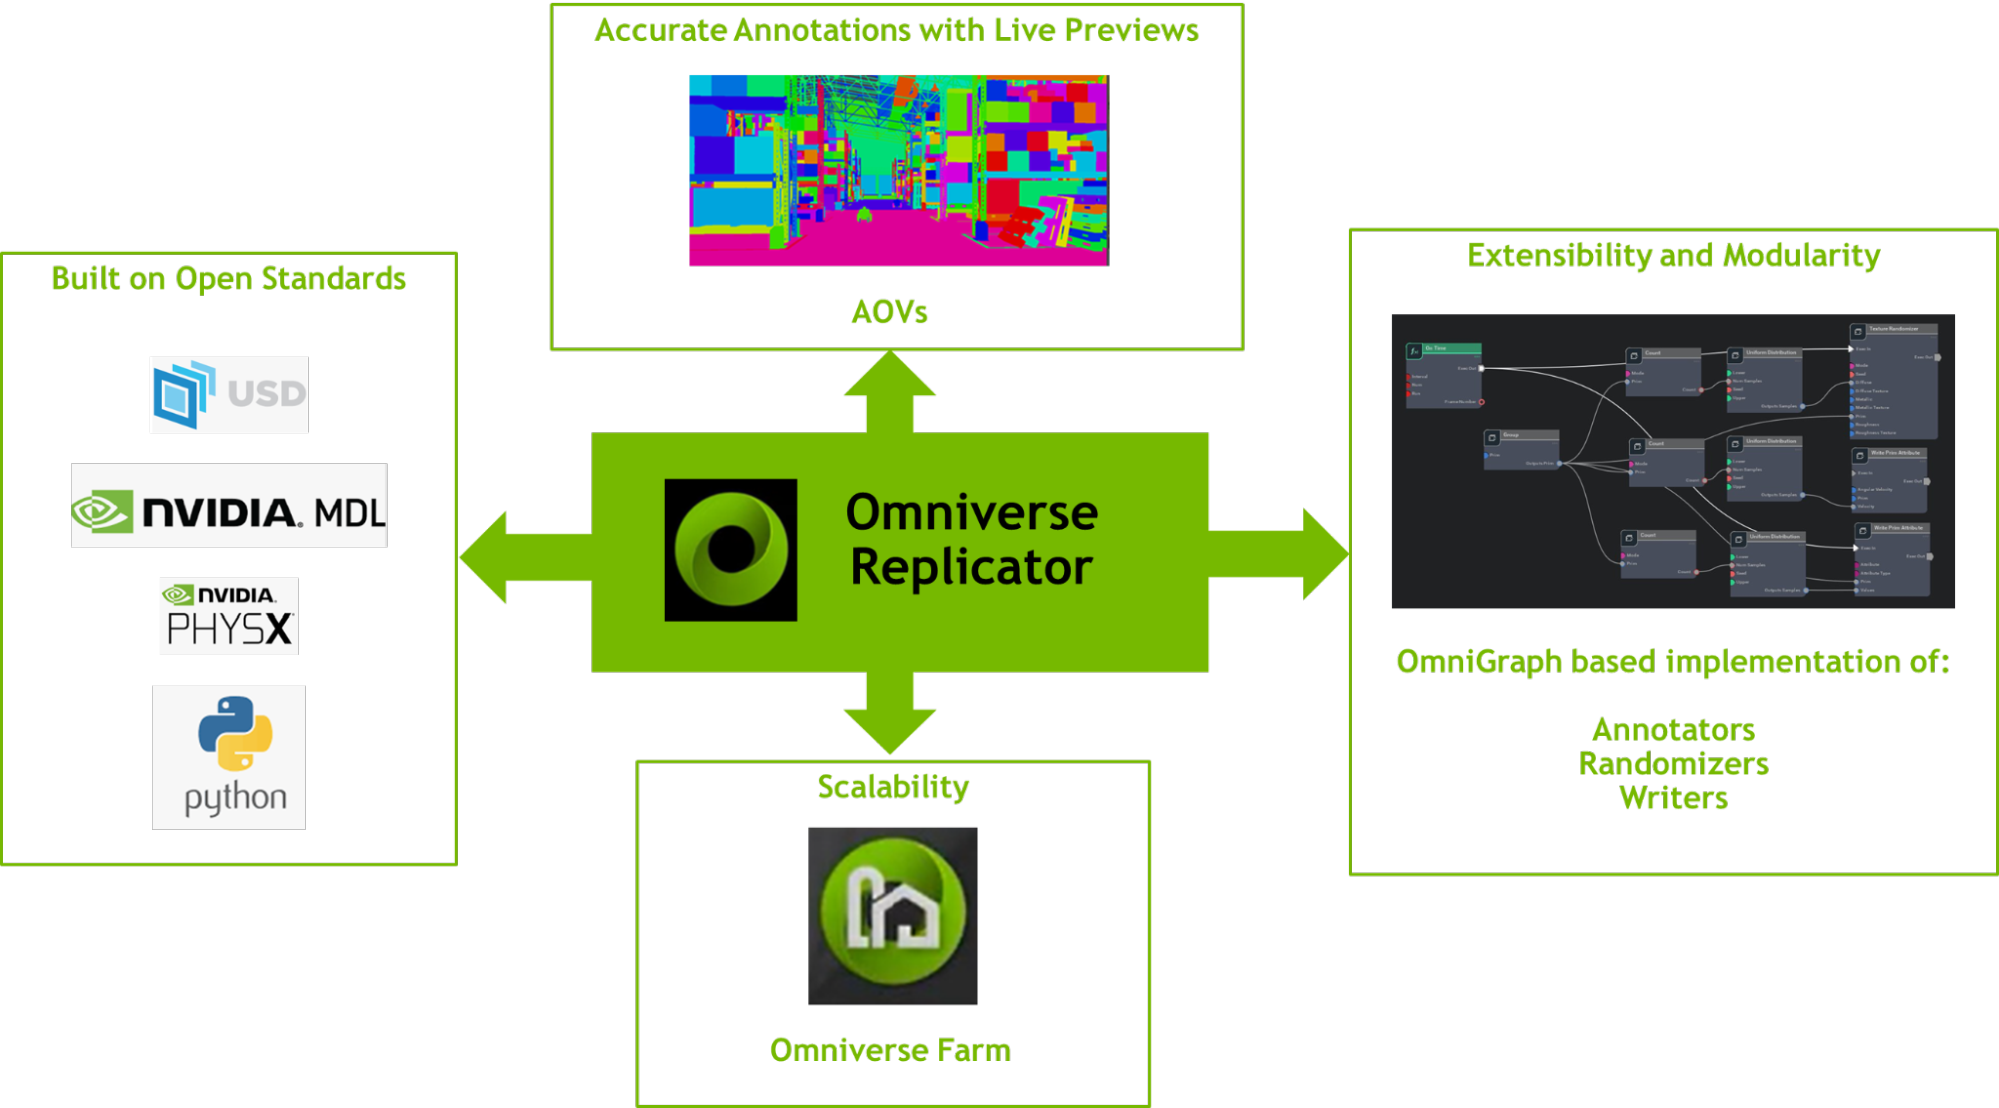 illustration showing open standards, the scalability with Omniverse Farm, the extensibility of OmniGraph, and the accuracy of live previews.